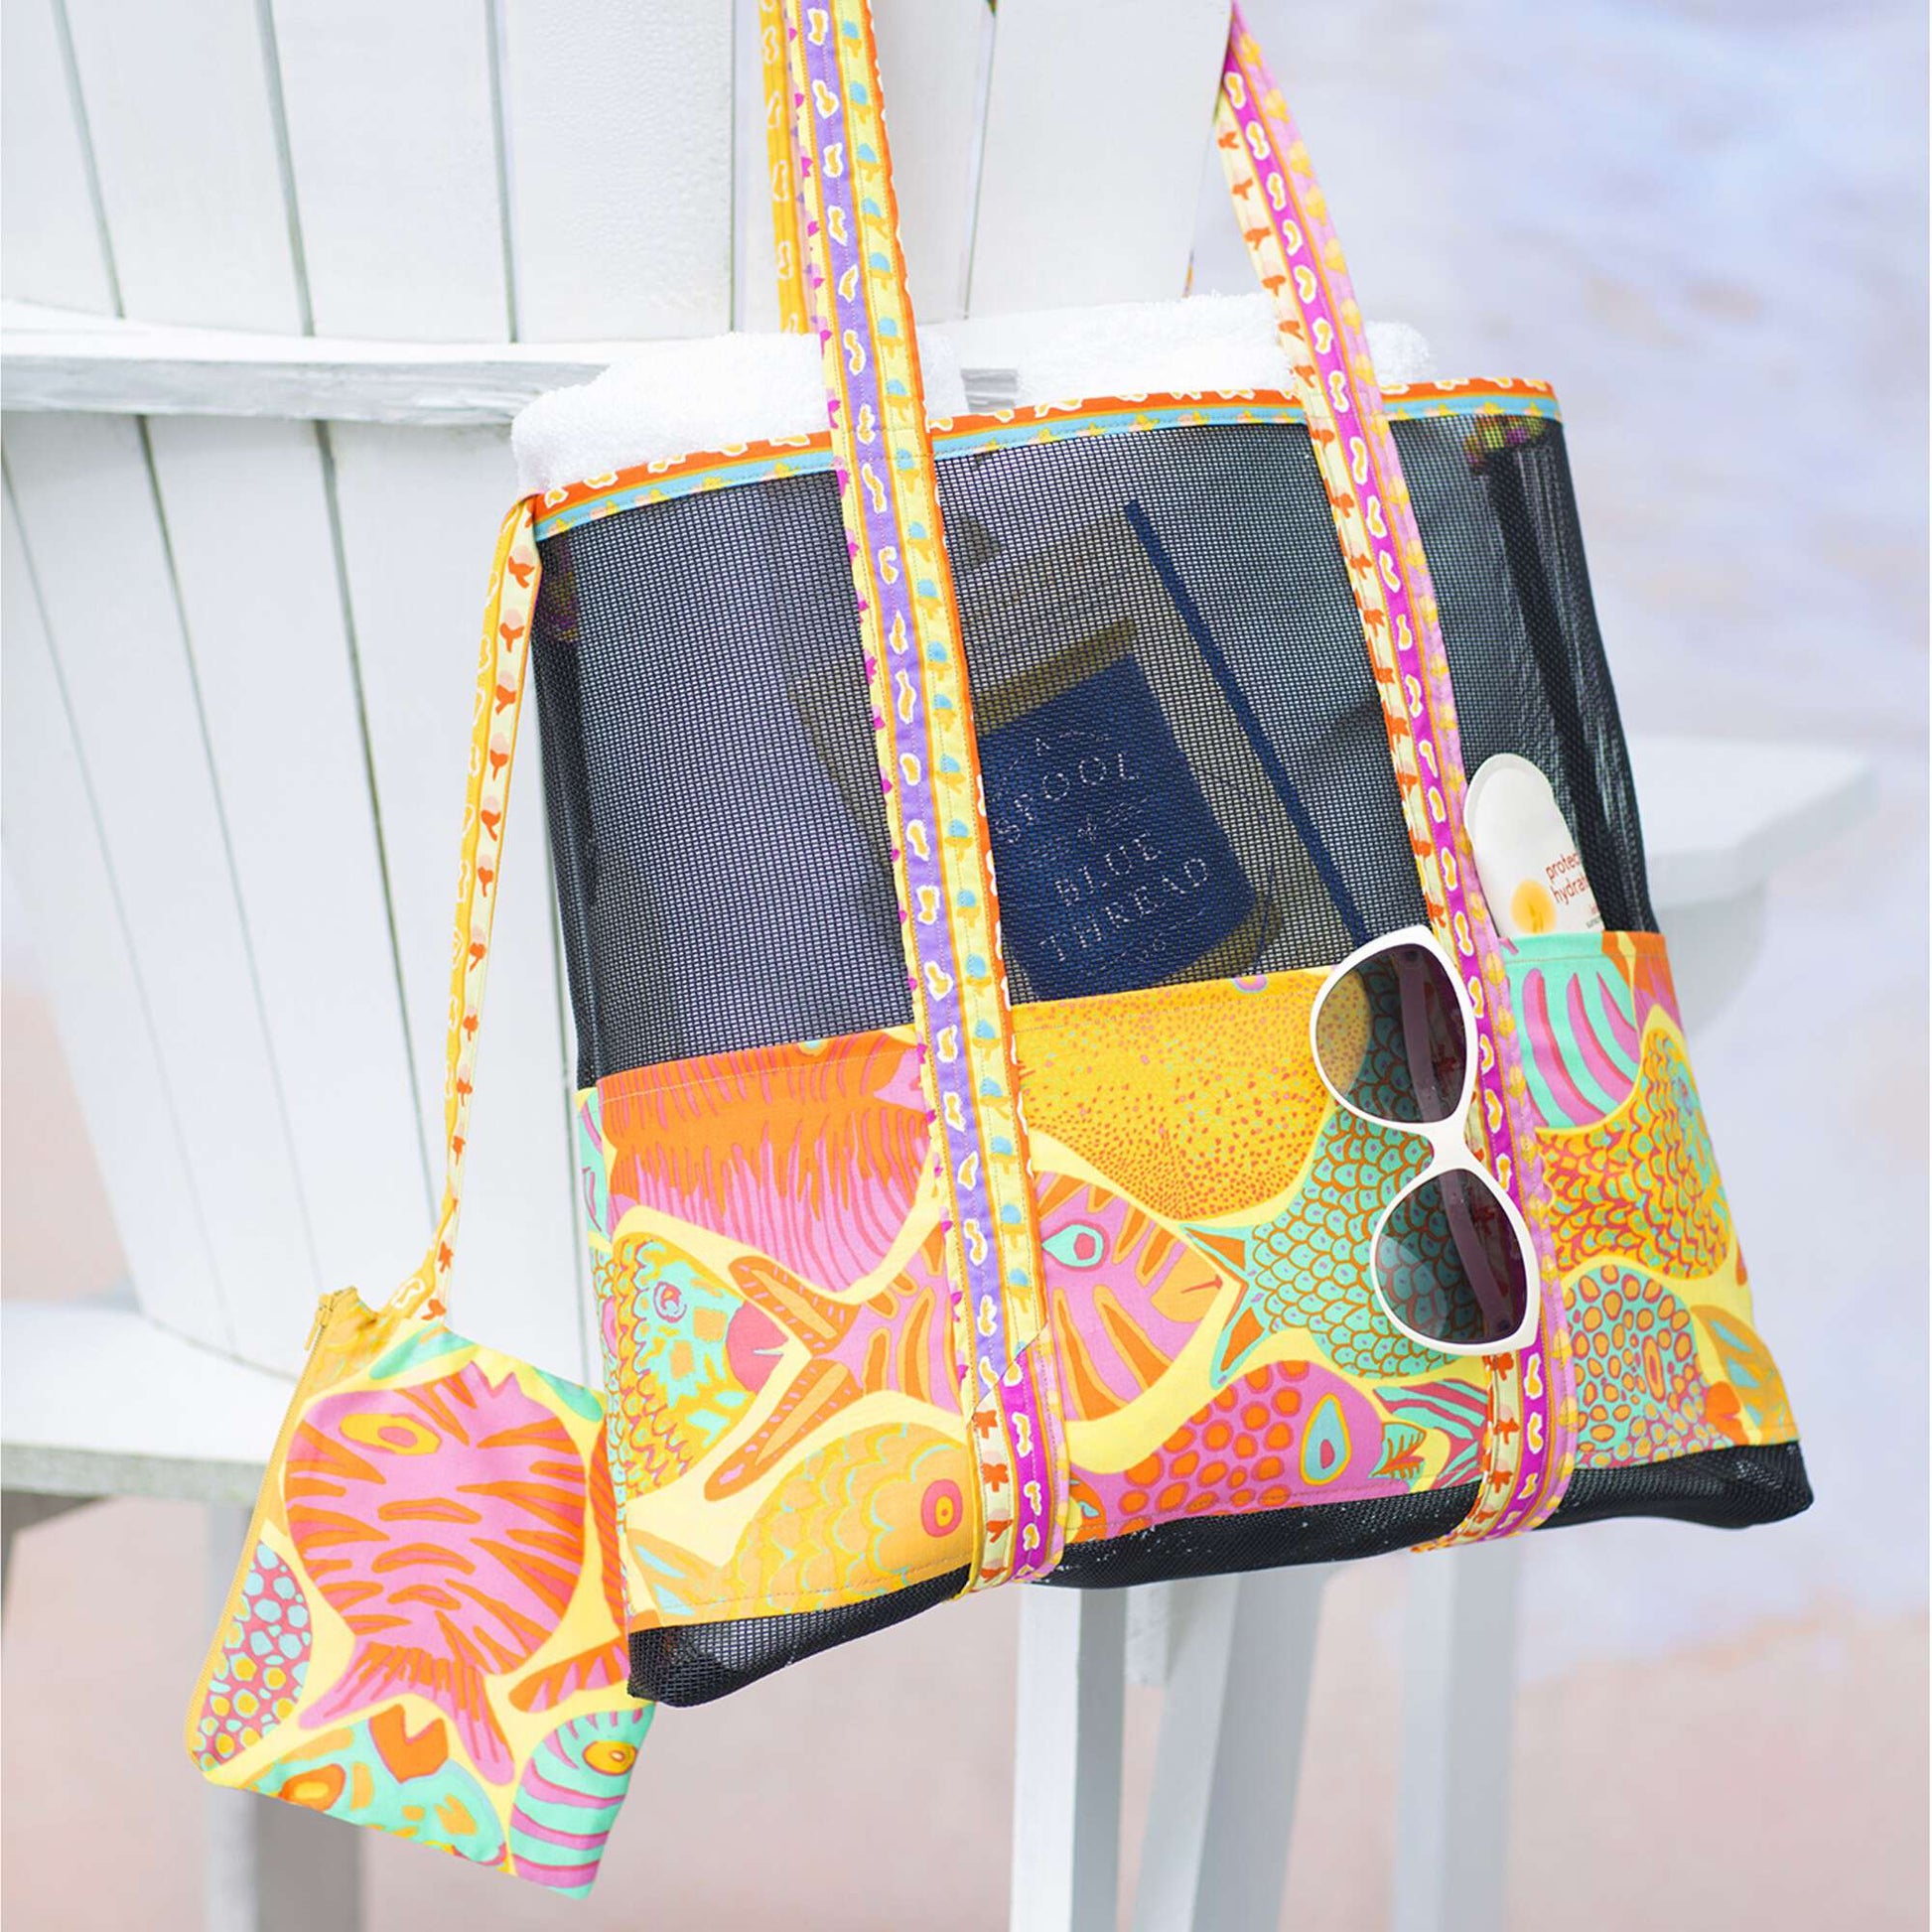 Free Coats & Clark Sewing Sand Sifter Beach Tote Pattern